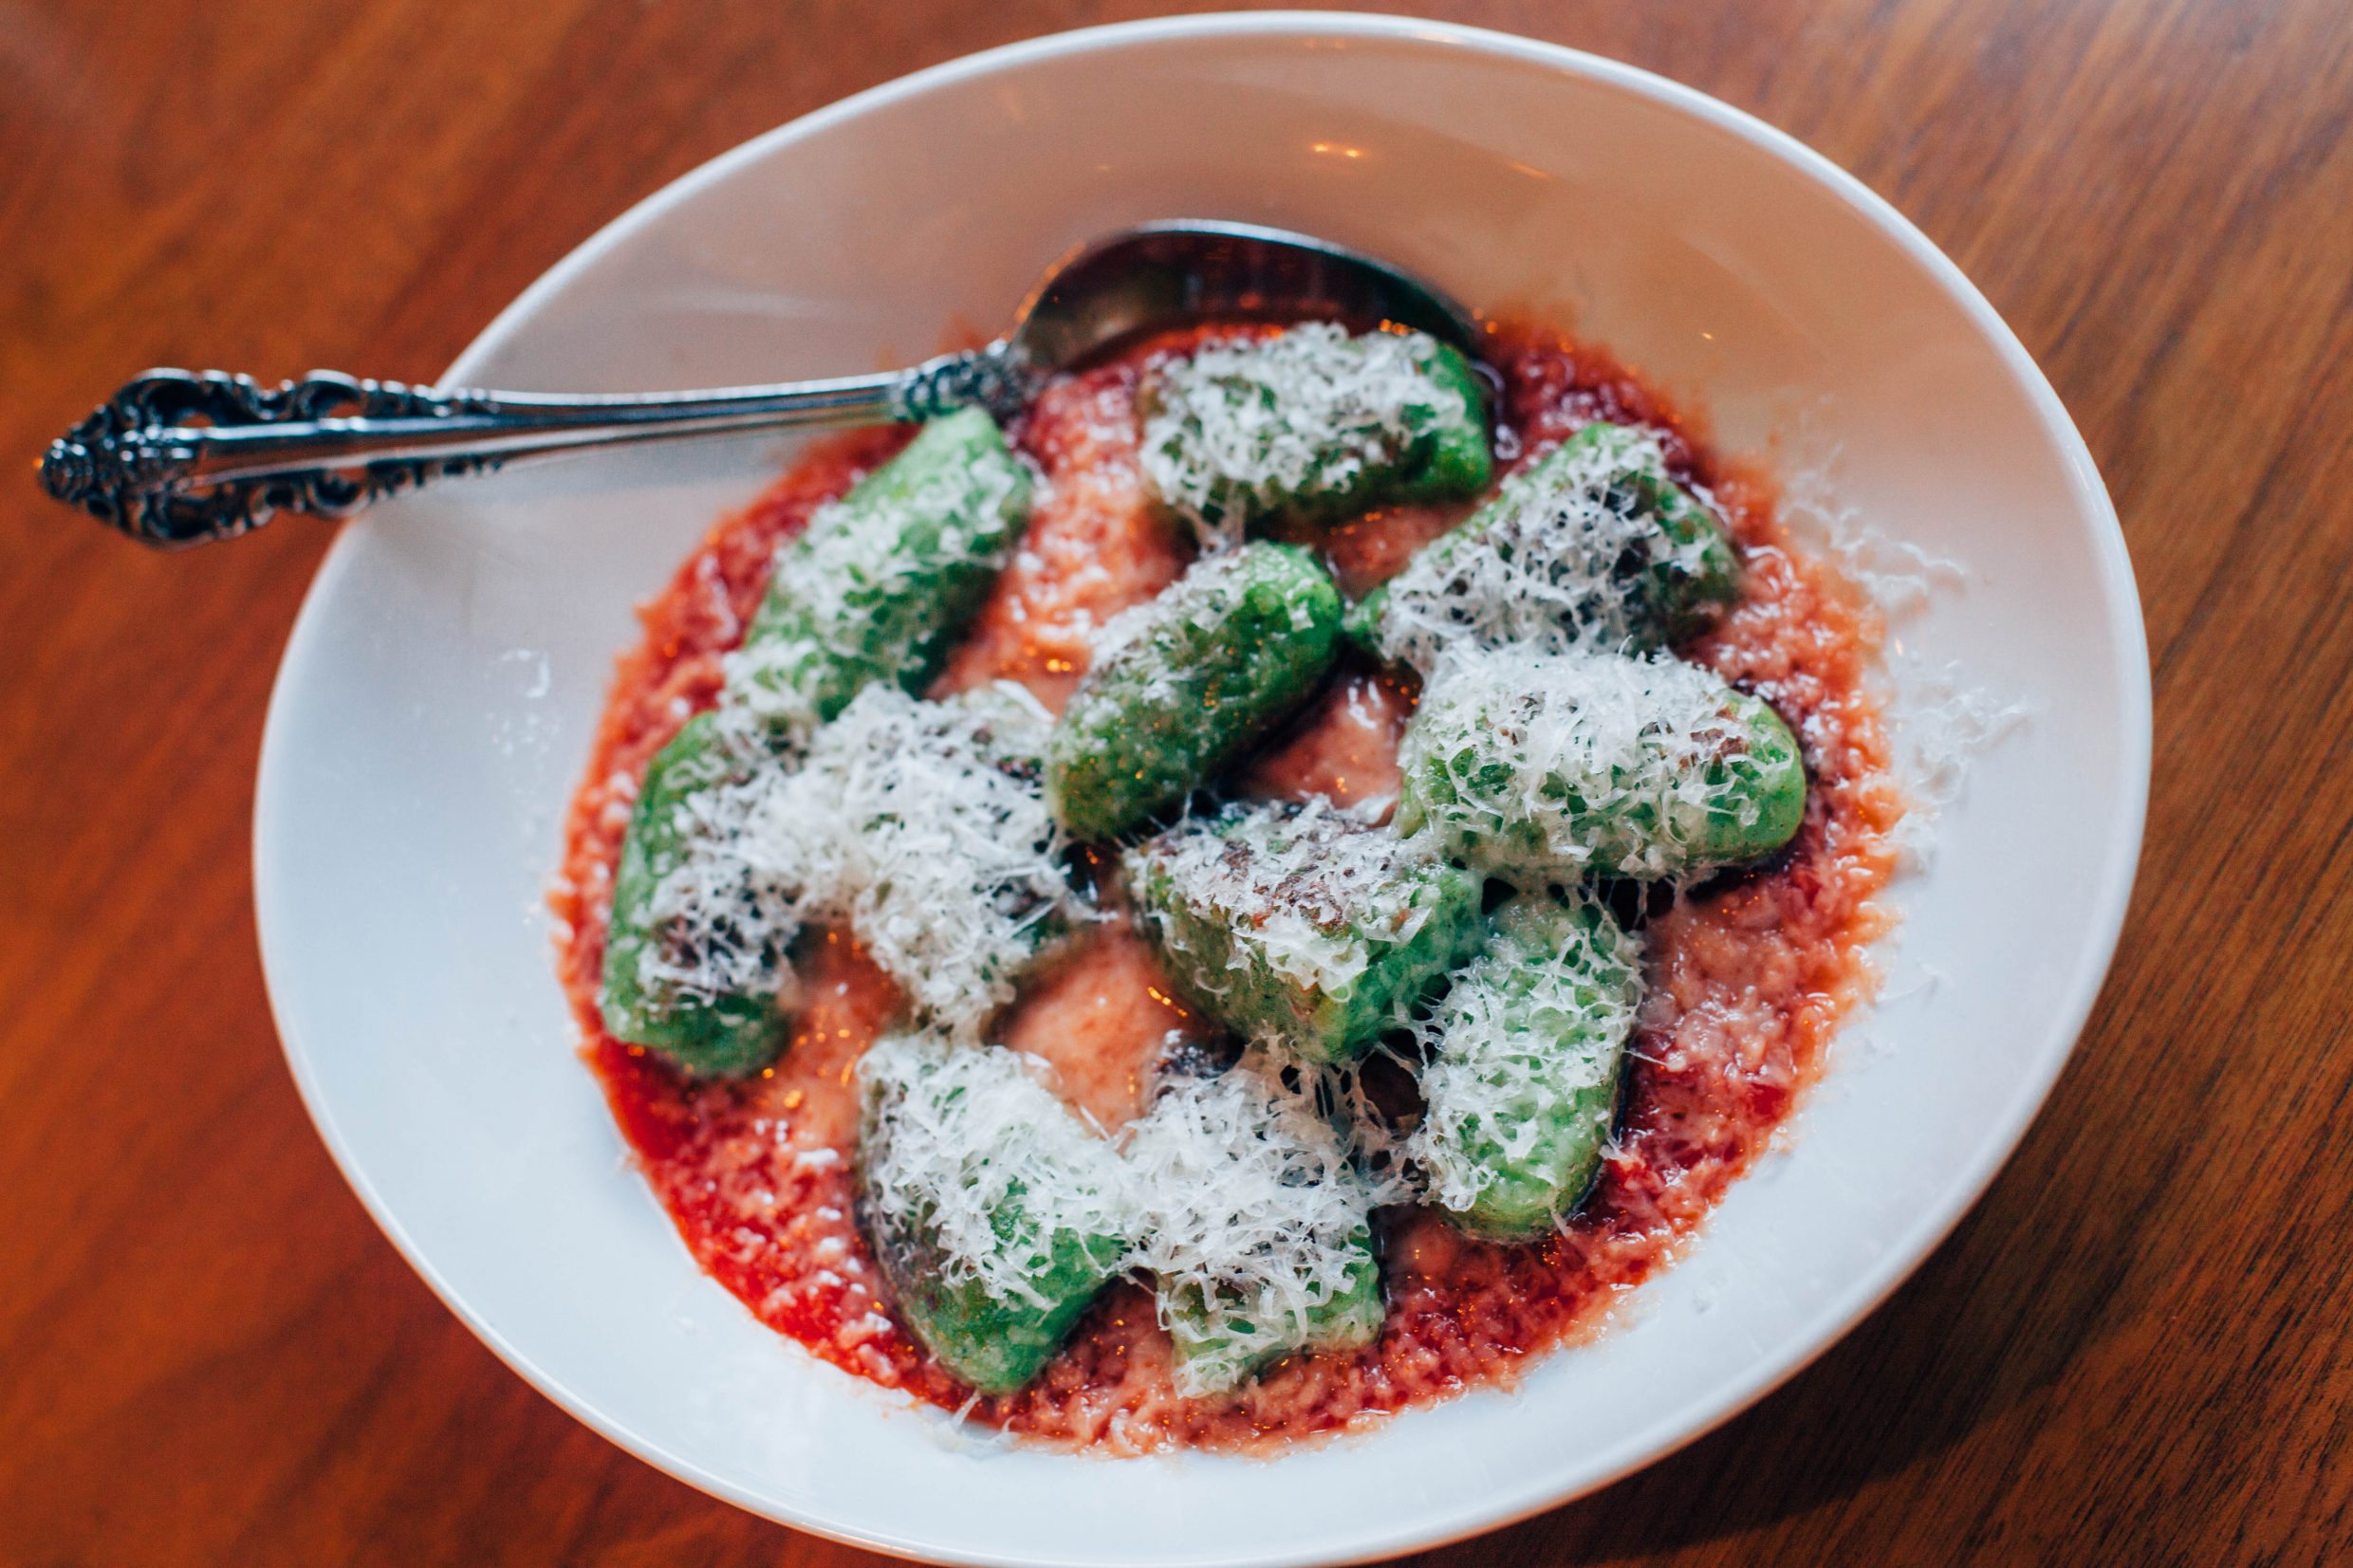 Tredici Enoteca - Spinach Gnocchi | A weekend in Washington, D.C. | Travel and Food Guide